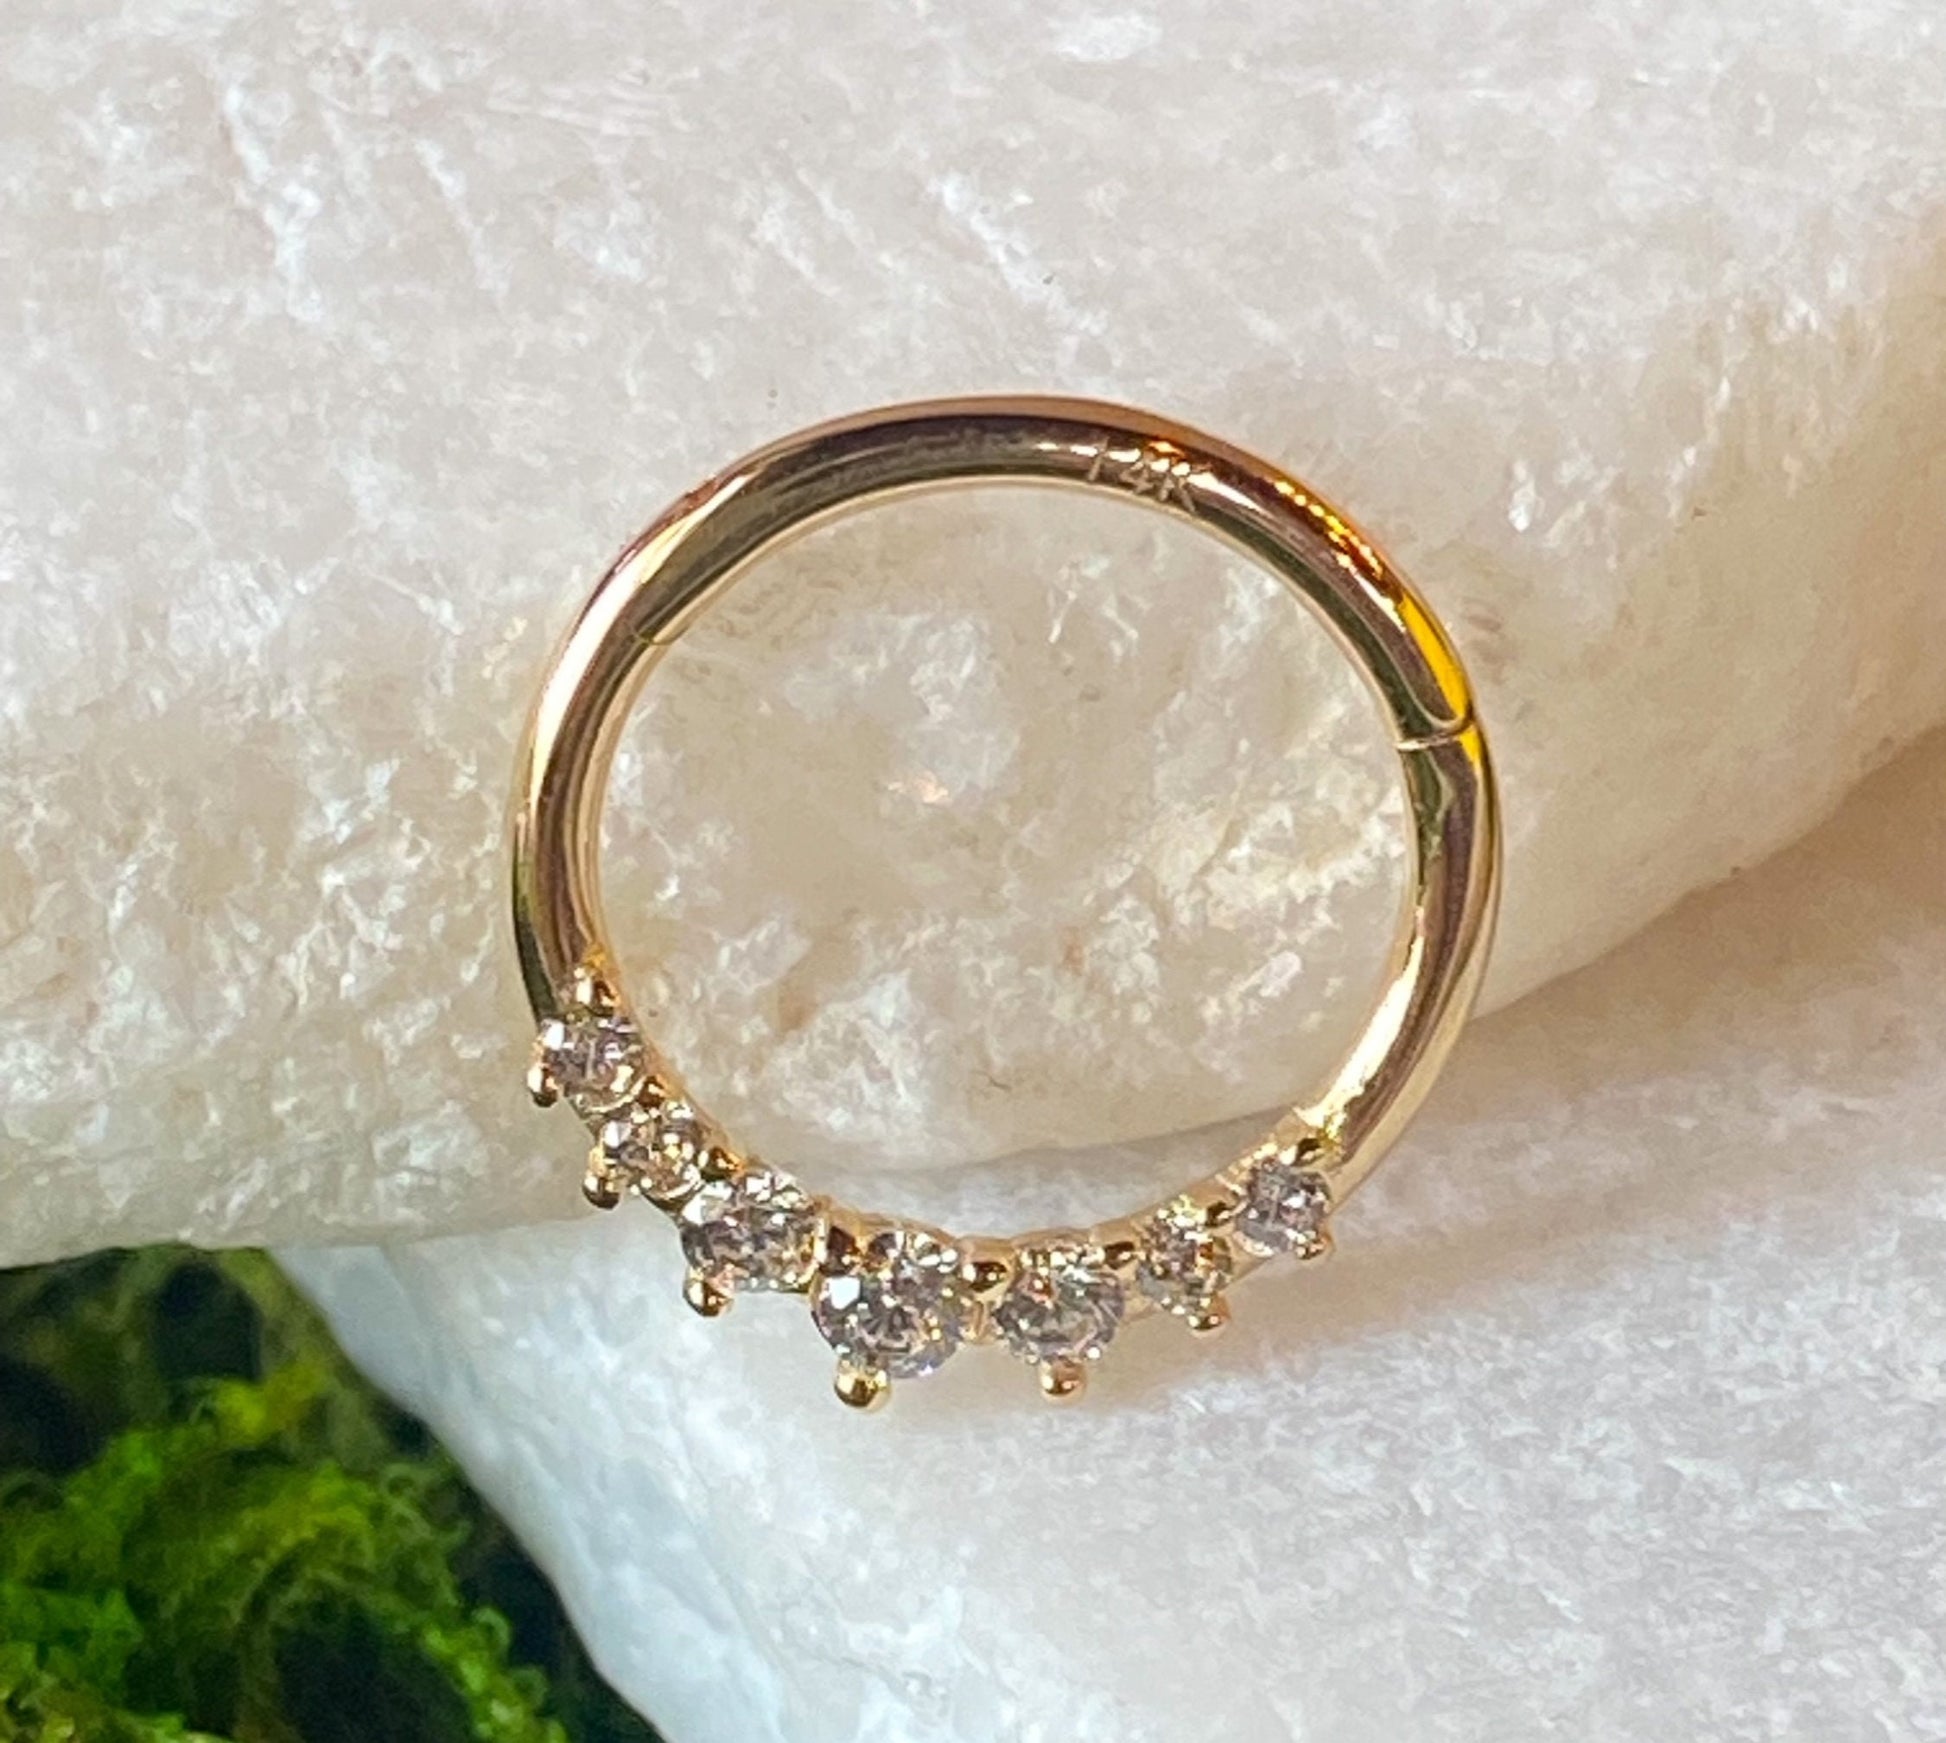 1 Piece of Beautiful Solid 14kt Gold Front Opals or CZ Gems Segment Ring - 10mm or 8mm - Gold & White Gold Available!